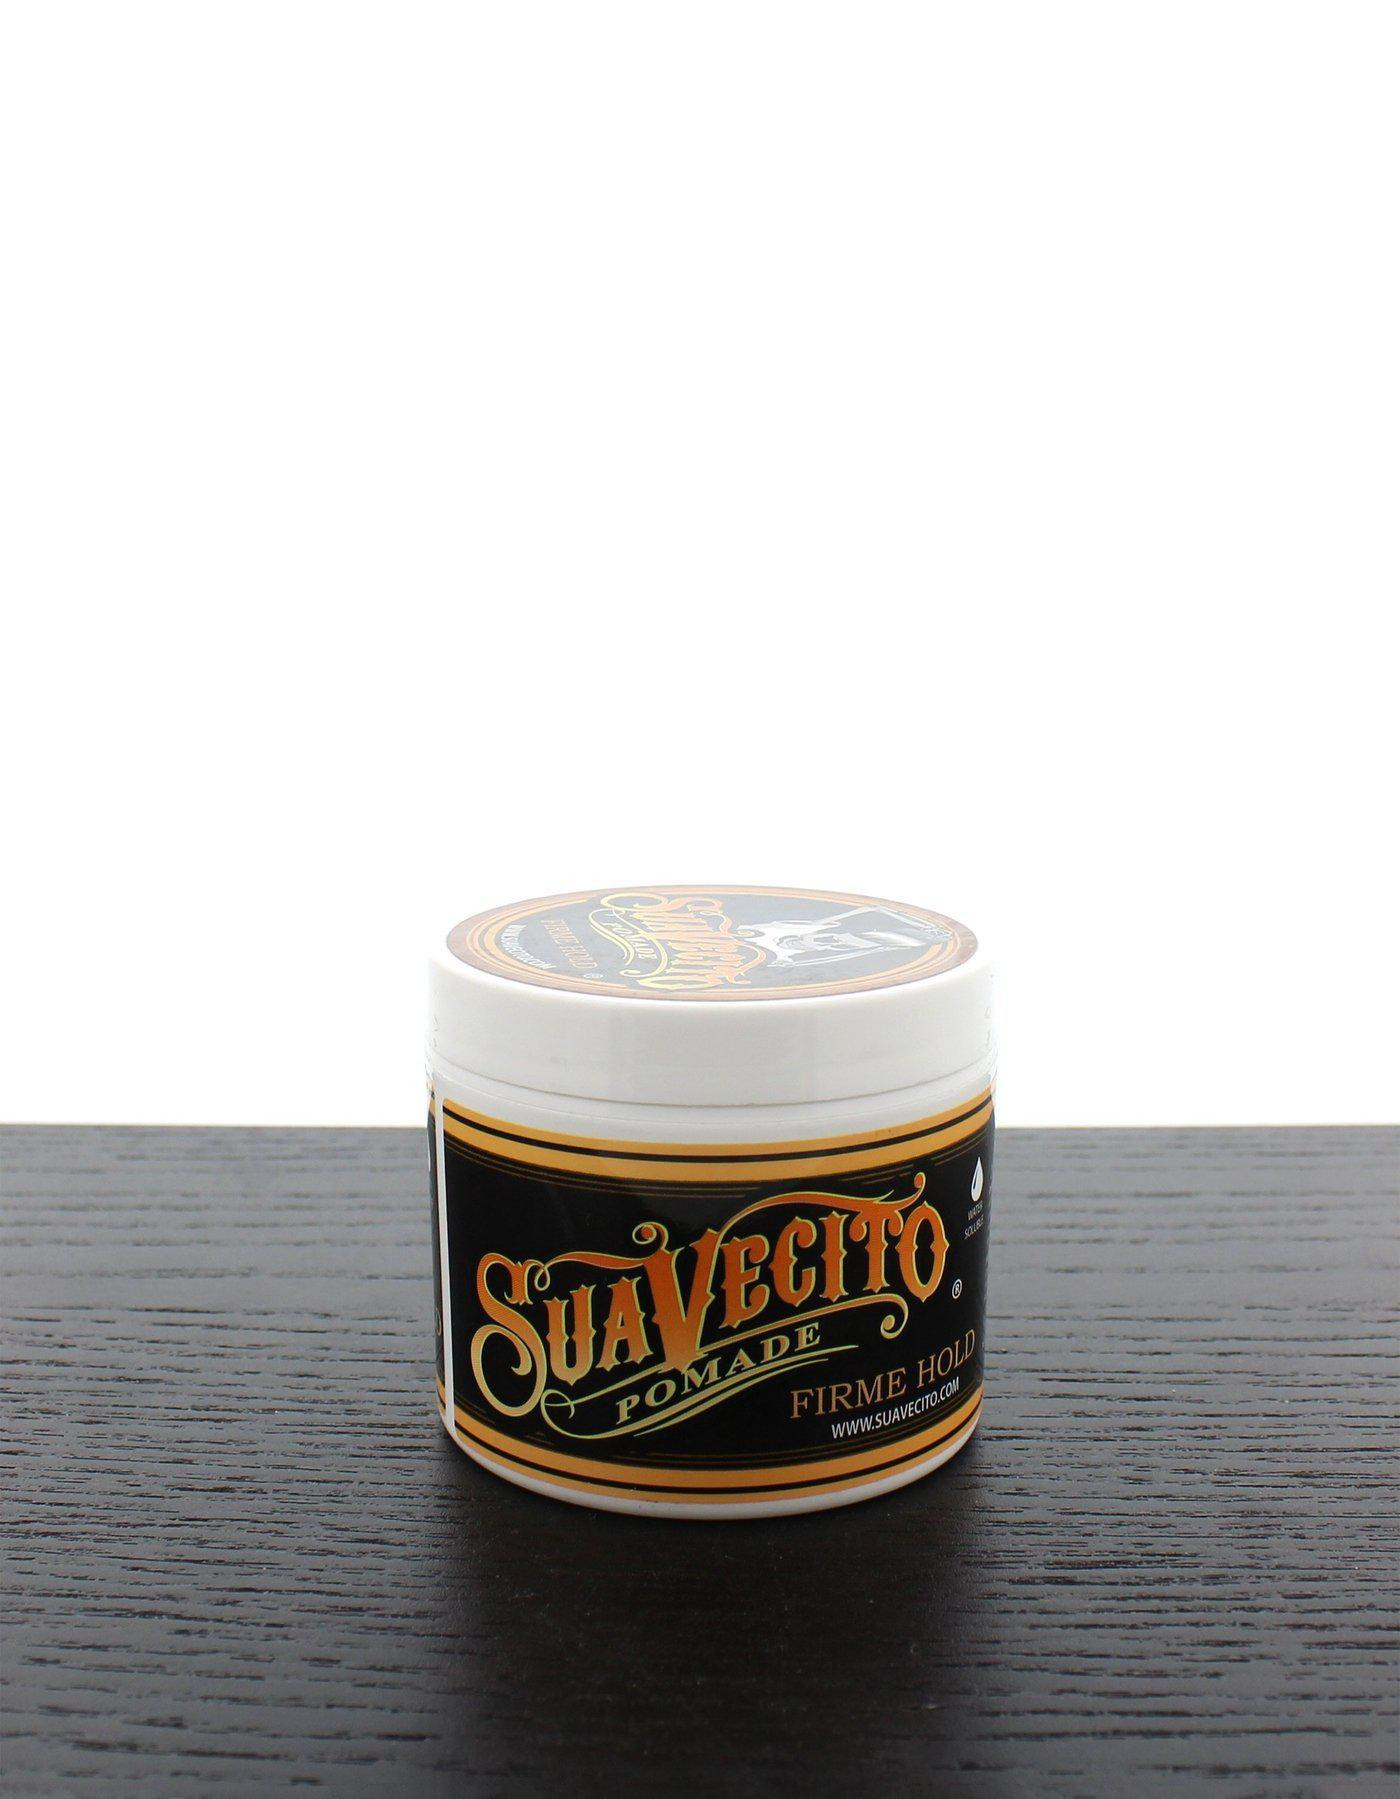 Product image 0 for Suavecito Pomade Strong/Firme Hold, 4oz can